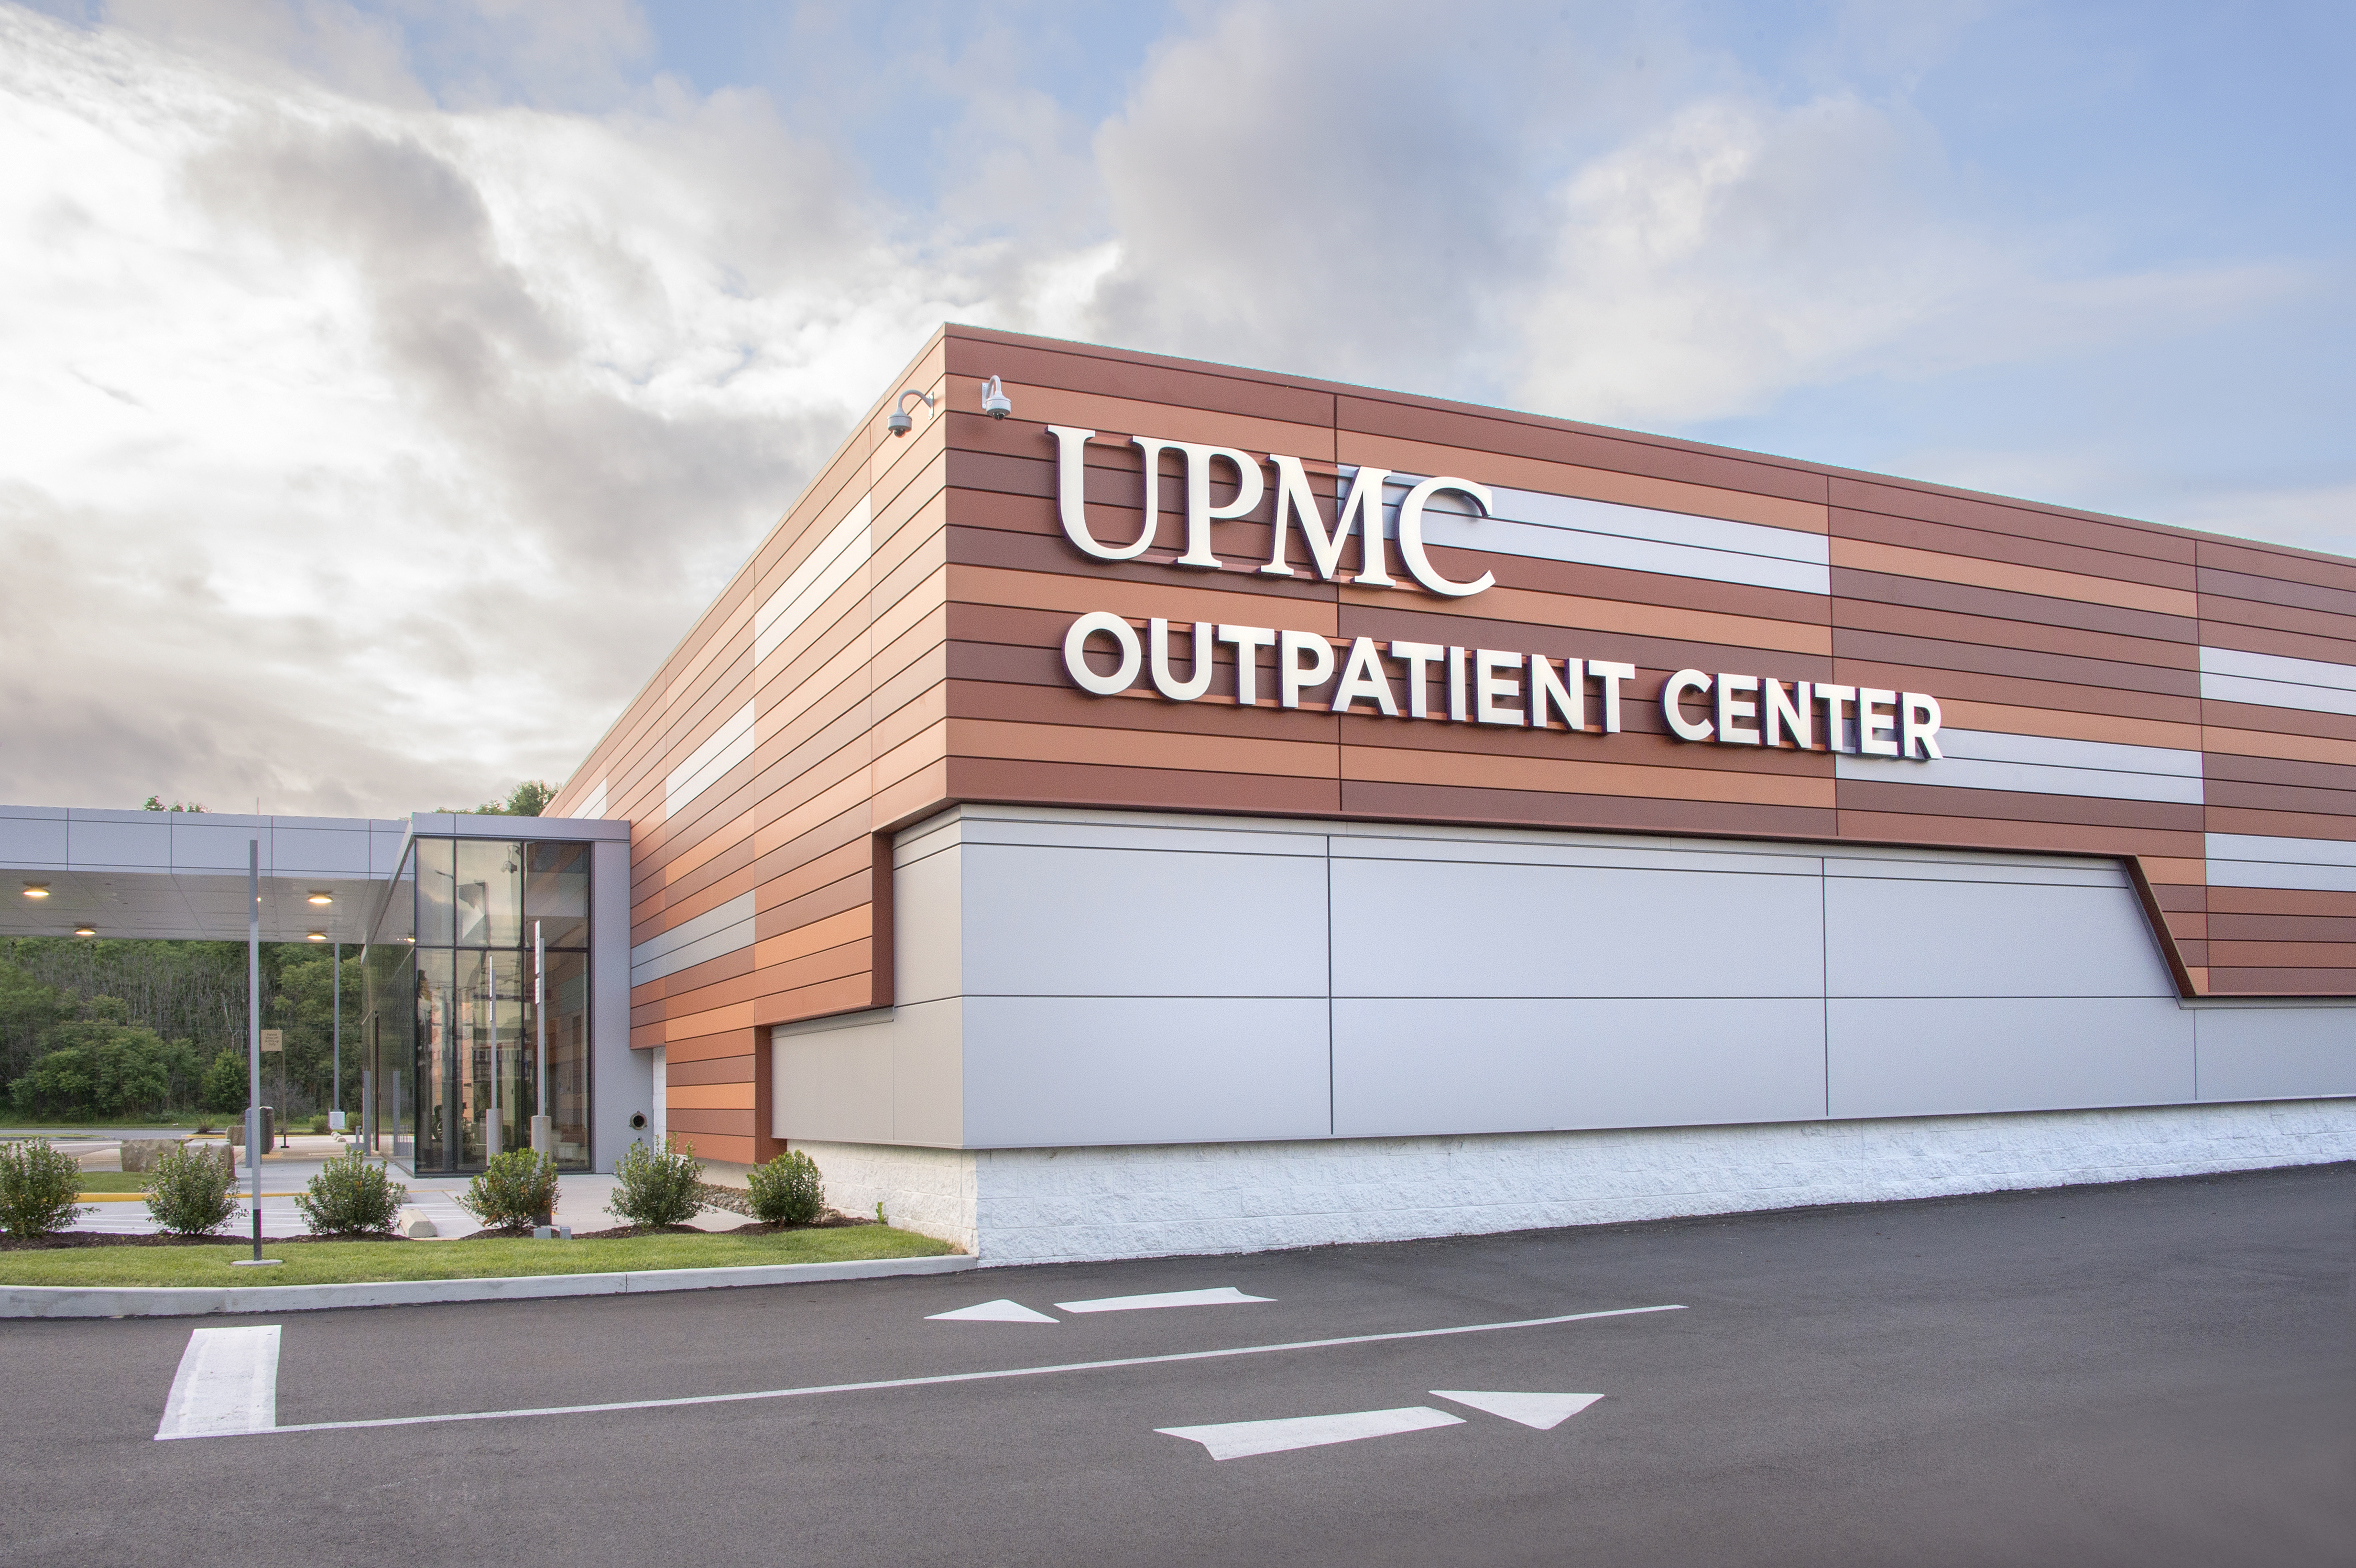 University of Pittsburgh Medical Center (UPMC) Outpatient Center